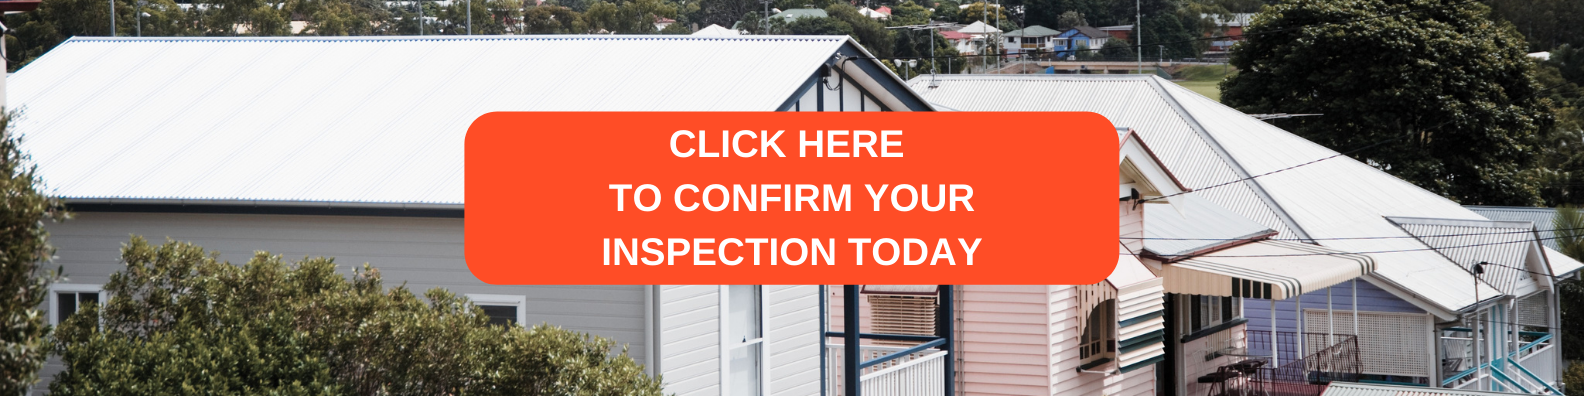 Book a Building Inspection in Brisbane